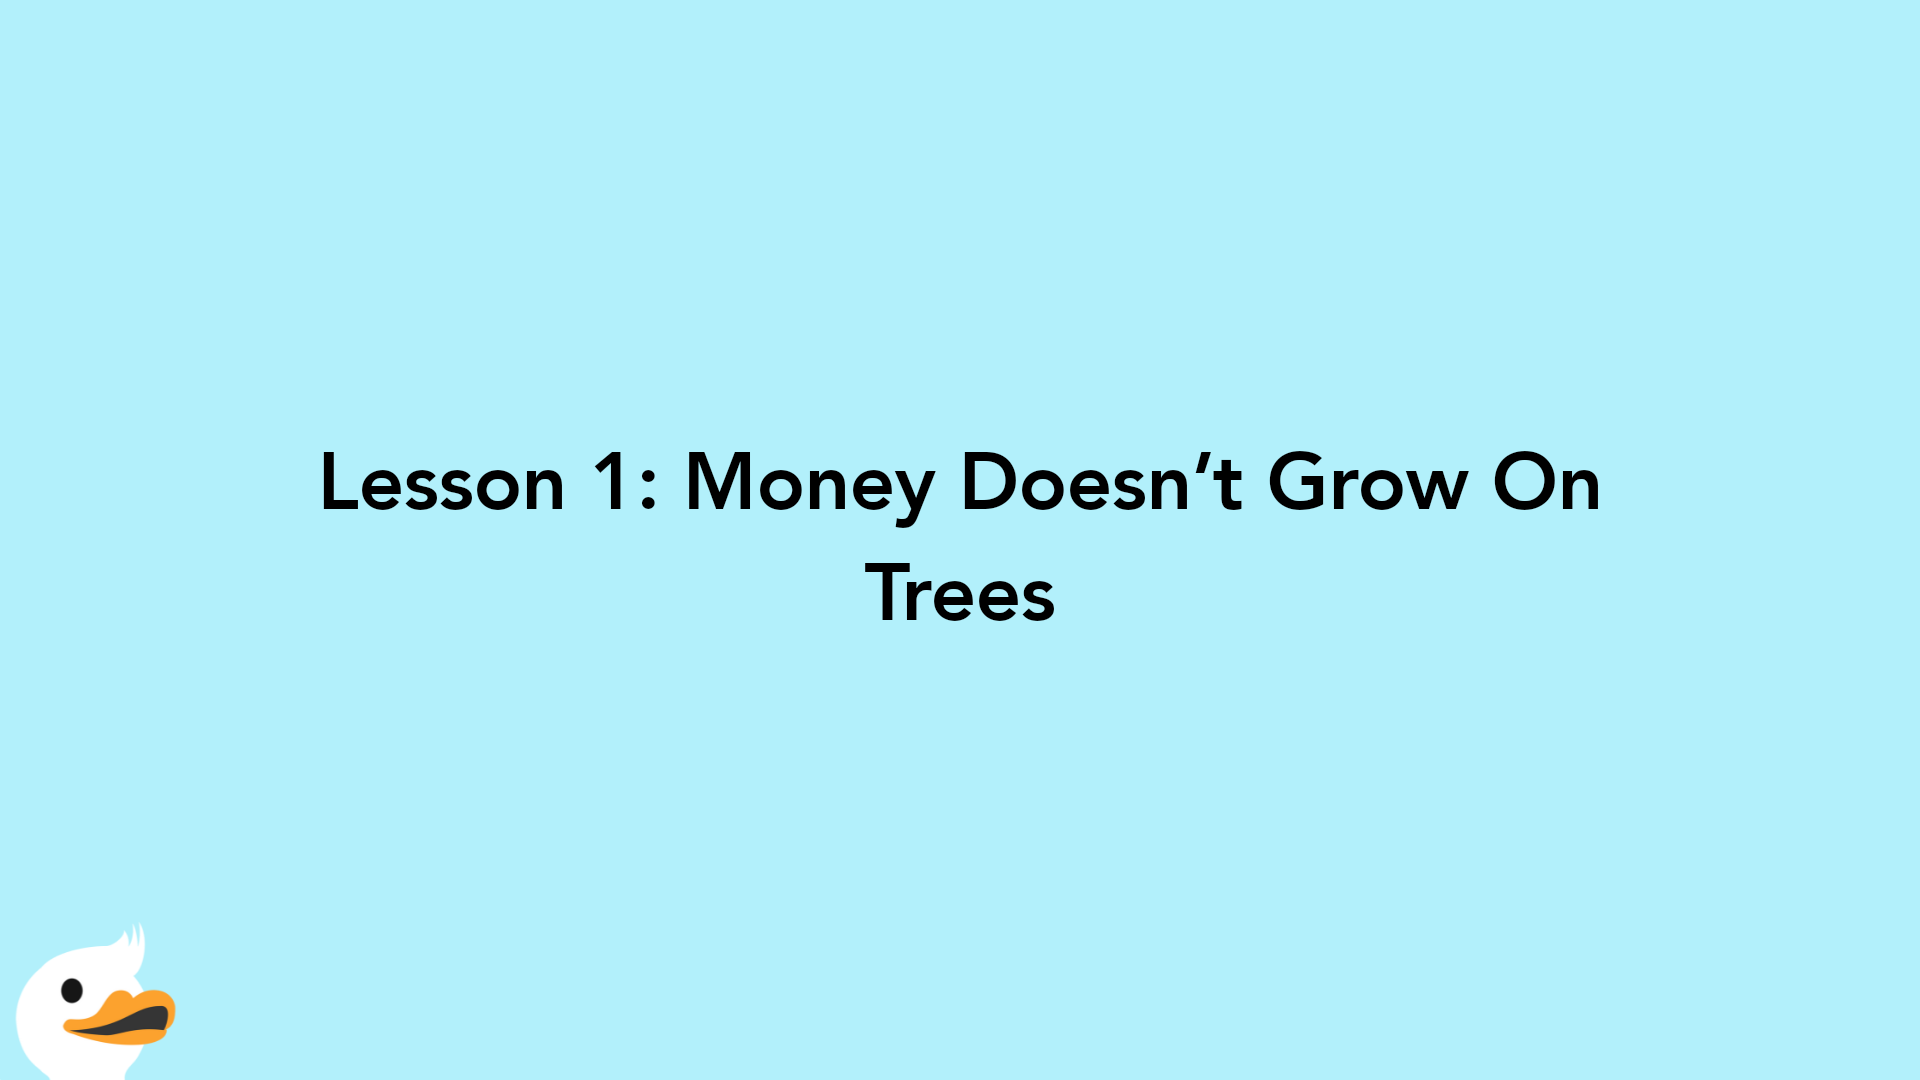 Lesson 1: Money Doesn’t Grow On Trees